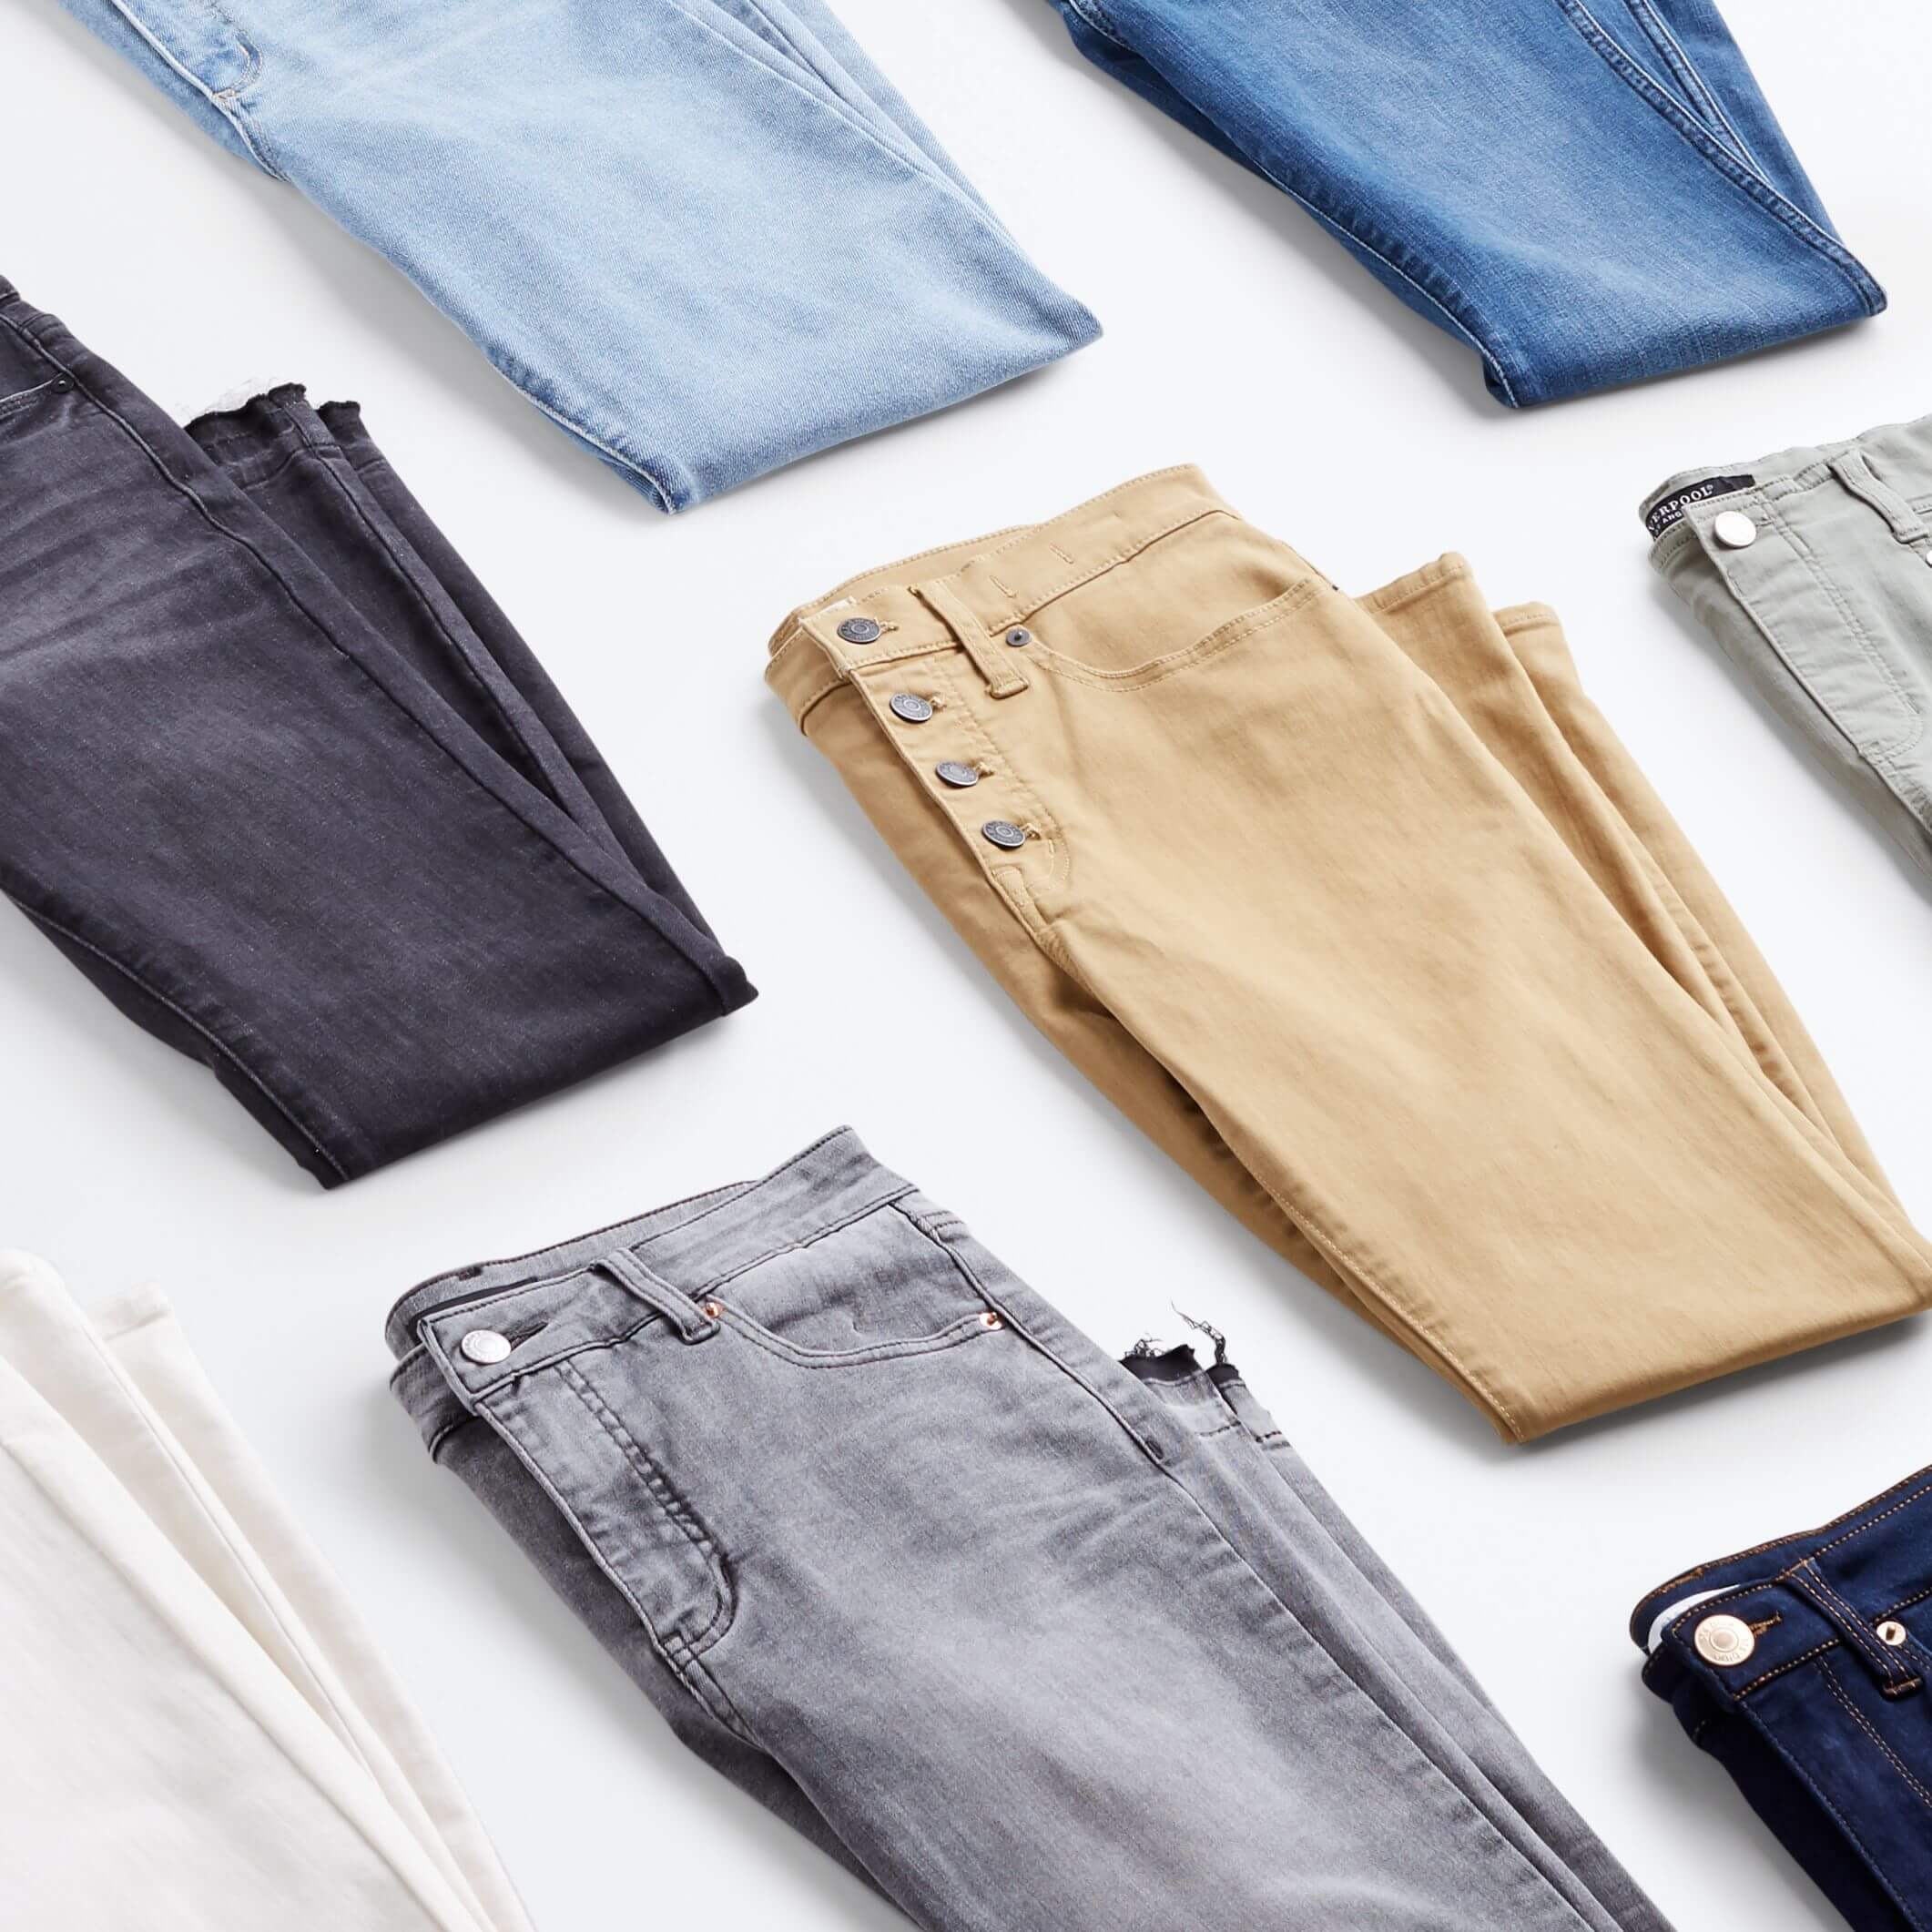 All of my jeans keep sliding down off my waist. I wear high rise. Am I  buying jeans that are too big or too small? - Quora